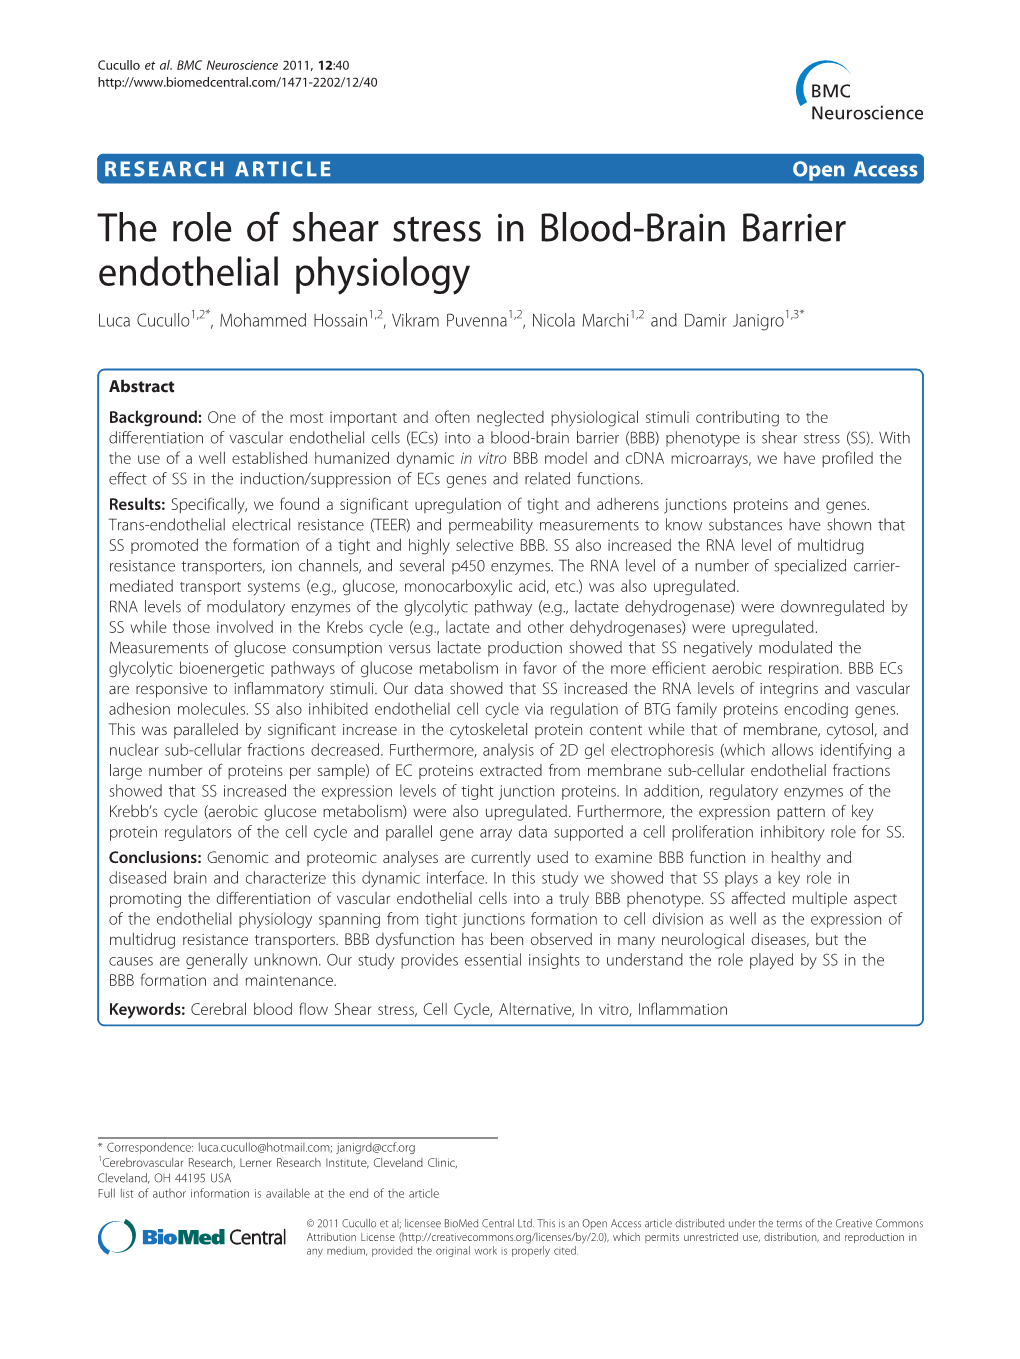 The Role of Shear Stress in Blood-Brain Barrier Endothelial